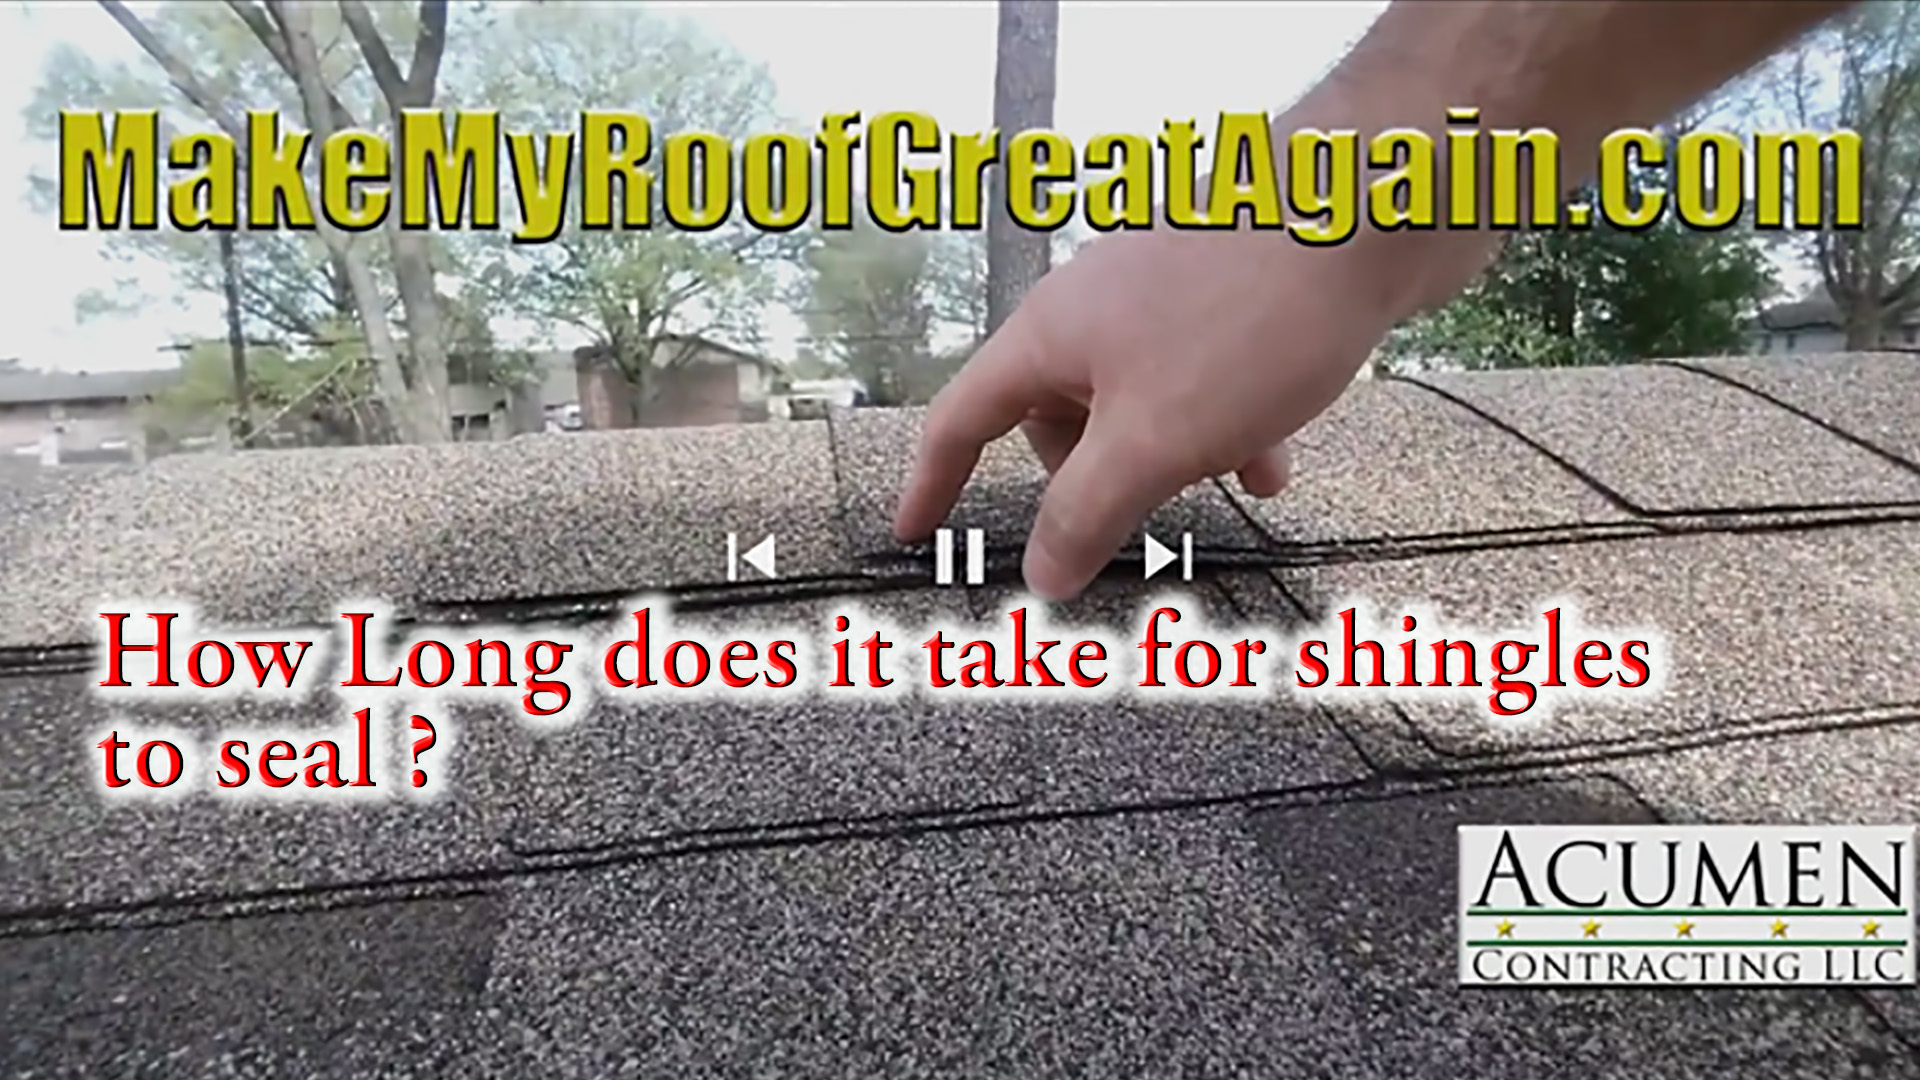 Make my roof great again - How long does it take for shingles to seal